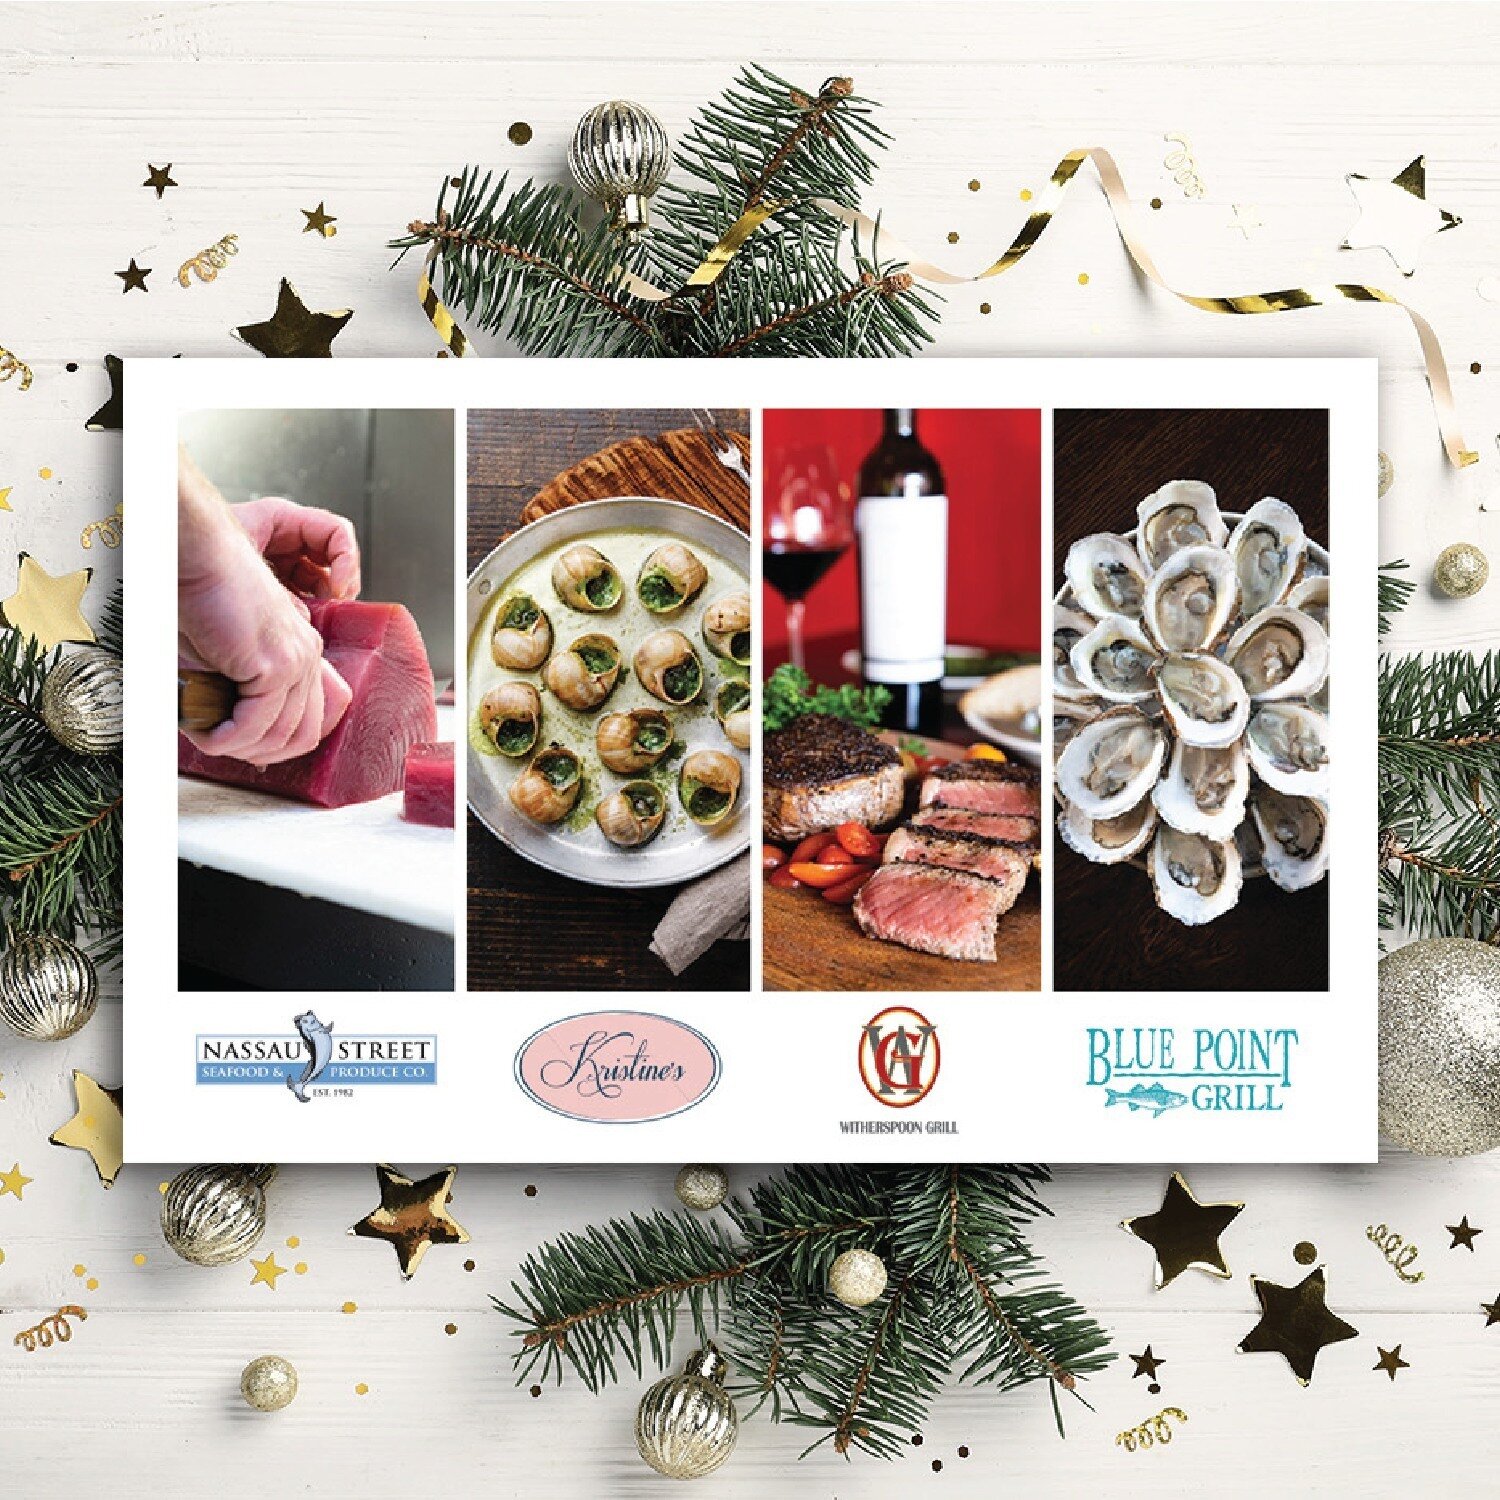 Dashing through the snow, to Blue Point Grill we go! ❄️
.
Looking for the perfect gift for someone who has it all? Whether they're a home chef or a major foodie, a Blue Point Grill gift card is the gift of the year.
.
Plus, when you spend $250 in a s